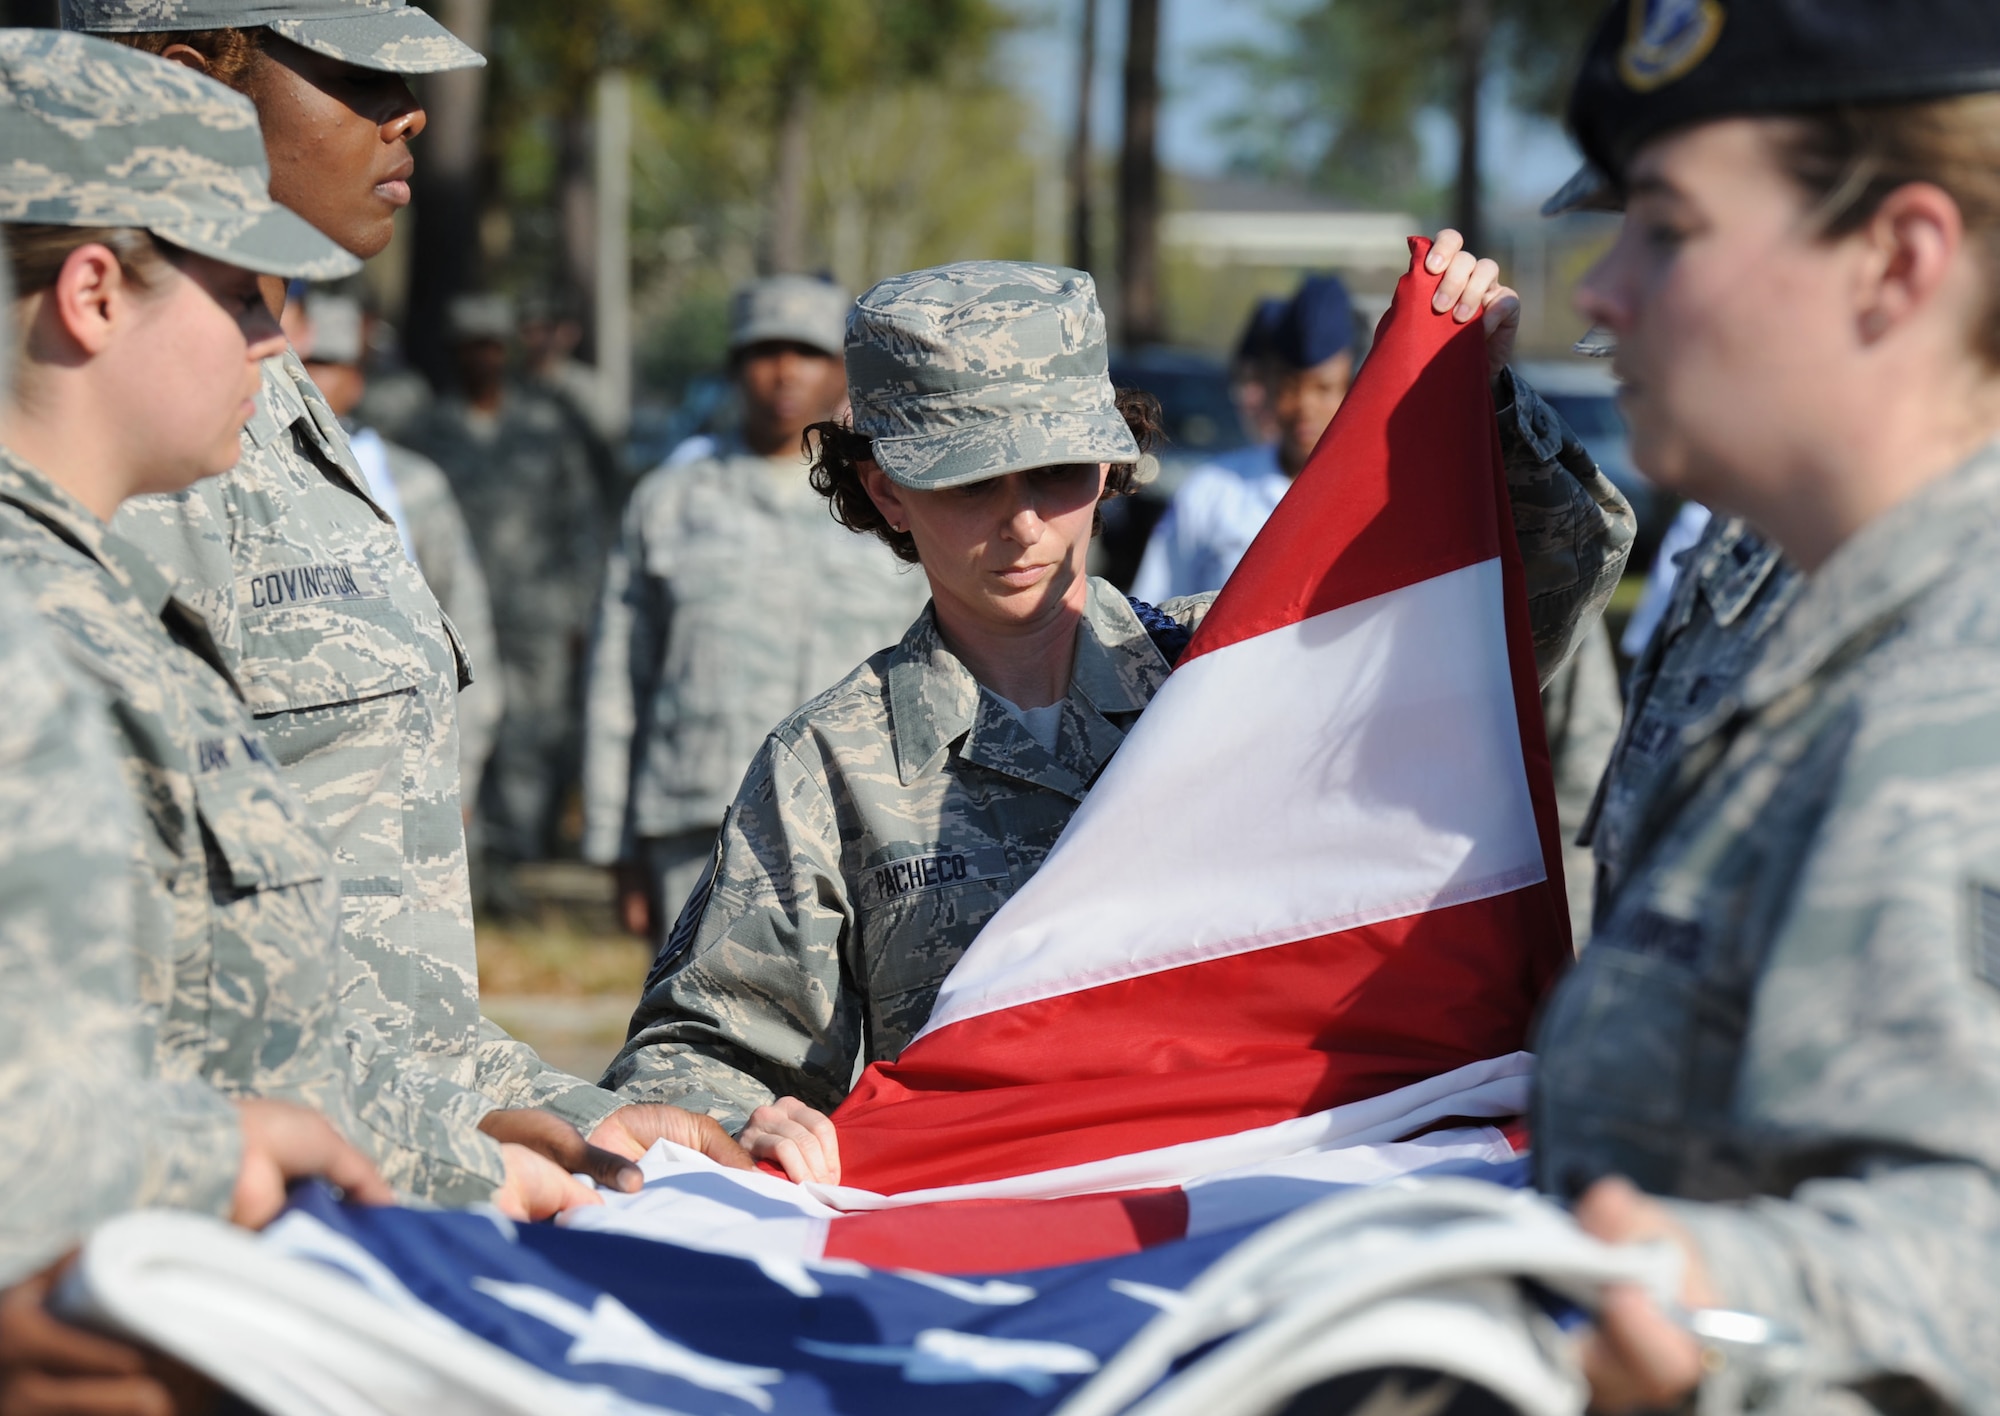 Master Sgt. Amber Pacheco, 81st Training Group Air National Guard liaison, folds the U.S. flag during a Women’s History Month all-female retreat ceremony March 21, 2017, on Keesler Air Force Base, Miss. The theme of 2017 WHM is “Honoring Trailblazing Women in Labor and Business” to honor women who have successfully challenged the female role in business and the paid labor force. (U.S. Air Force photo by Kemberly Groue)